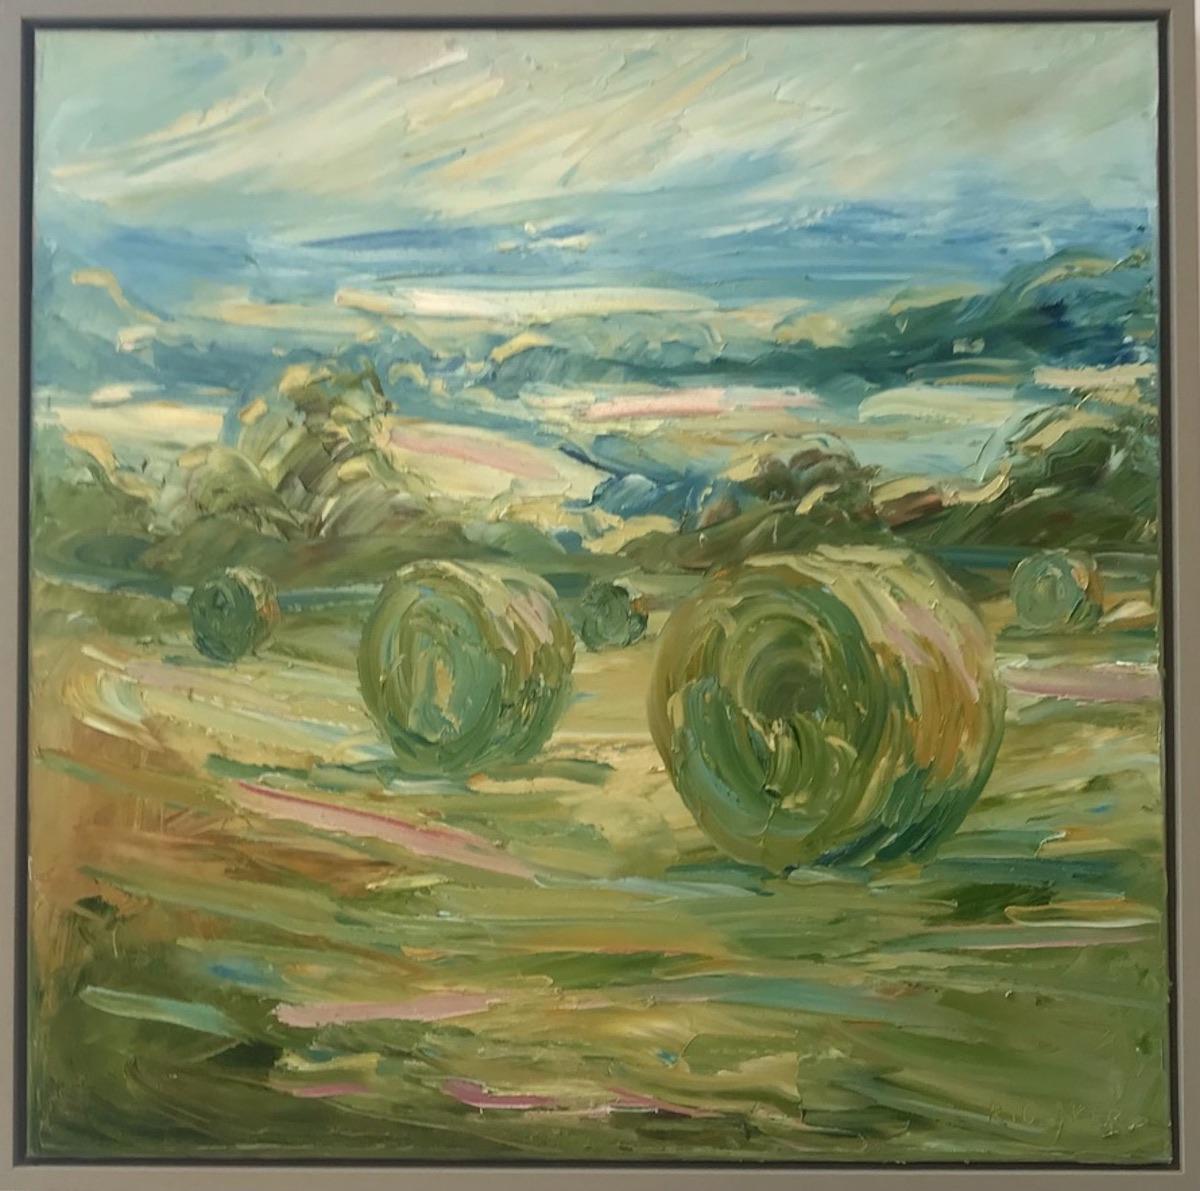 Big Bales July by Rupert Aker [2022]
original and hand signed by the artist 
Oil on Canvas
Image size: H:75 cm x W:75 cm
Complete Size of Unframed Work: H:75 cm x W:75 cm x D:2.5cm
Frame Size: H:80 cm x W:80 cm x D:4cm
Sold Framed
Please note that